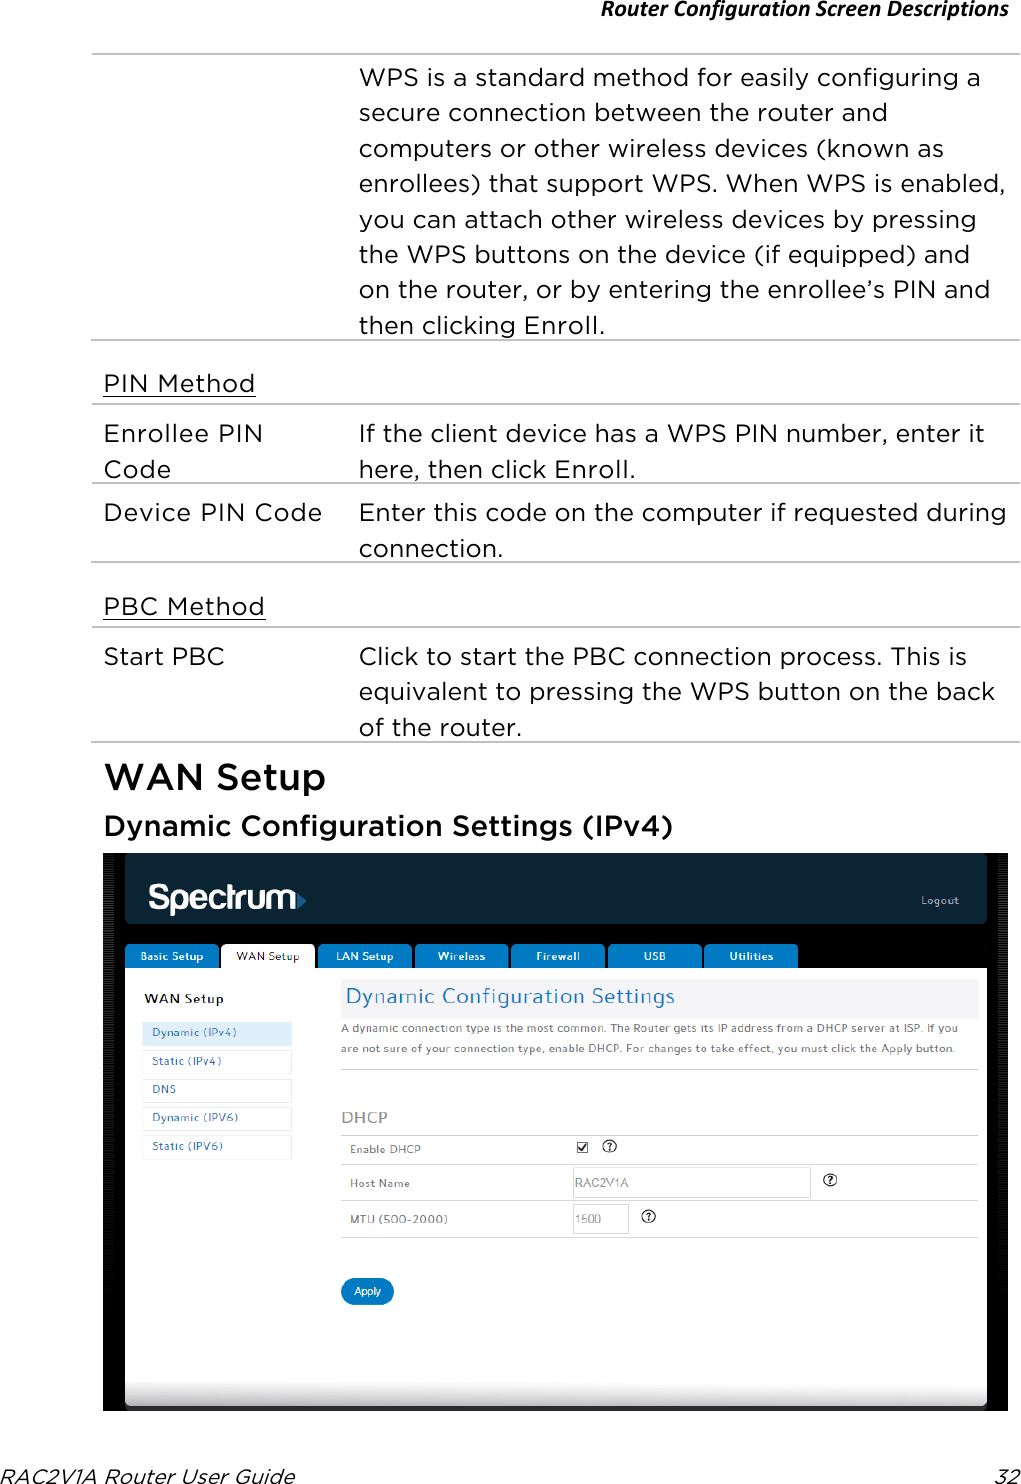 Router Configuration Screen Descriptions  RAC2V1A Router User Guide 32  WPS is a standard method for easily configuring a secure connection between the router and computers or other wireless devices (known as enrollees) that support WPS. When WPS is enabled, you can attach other wireless devices by pressing the WPS buttons on the device (if equipped) and on the router, or by entering the enrollee’s PIN and then clicking Enroll. PIN Method Enrollee PIN Code If the client device has a WPS PIN number, enter it here, then click Enroll. Device PIN Code Enter this code on the computer if requested during connection. PBC Method Start PBC Click to start the PBC connection process. This is equivalent to pressing the WPS button on the back of the router.   WAN Setup Dynamic Configuration Settings (IPv4)  